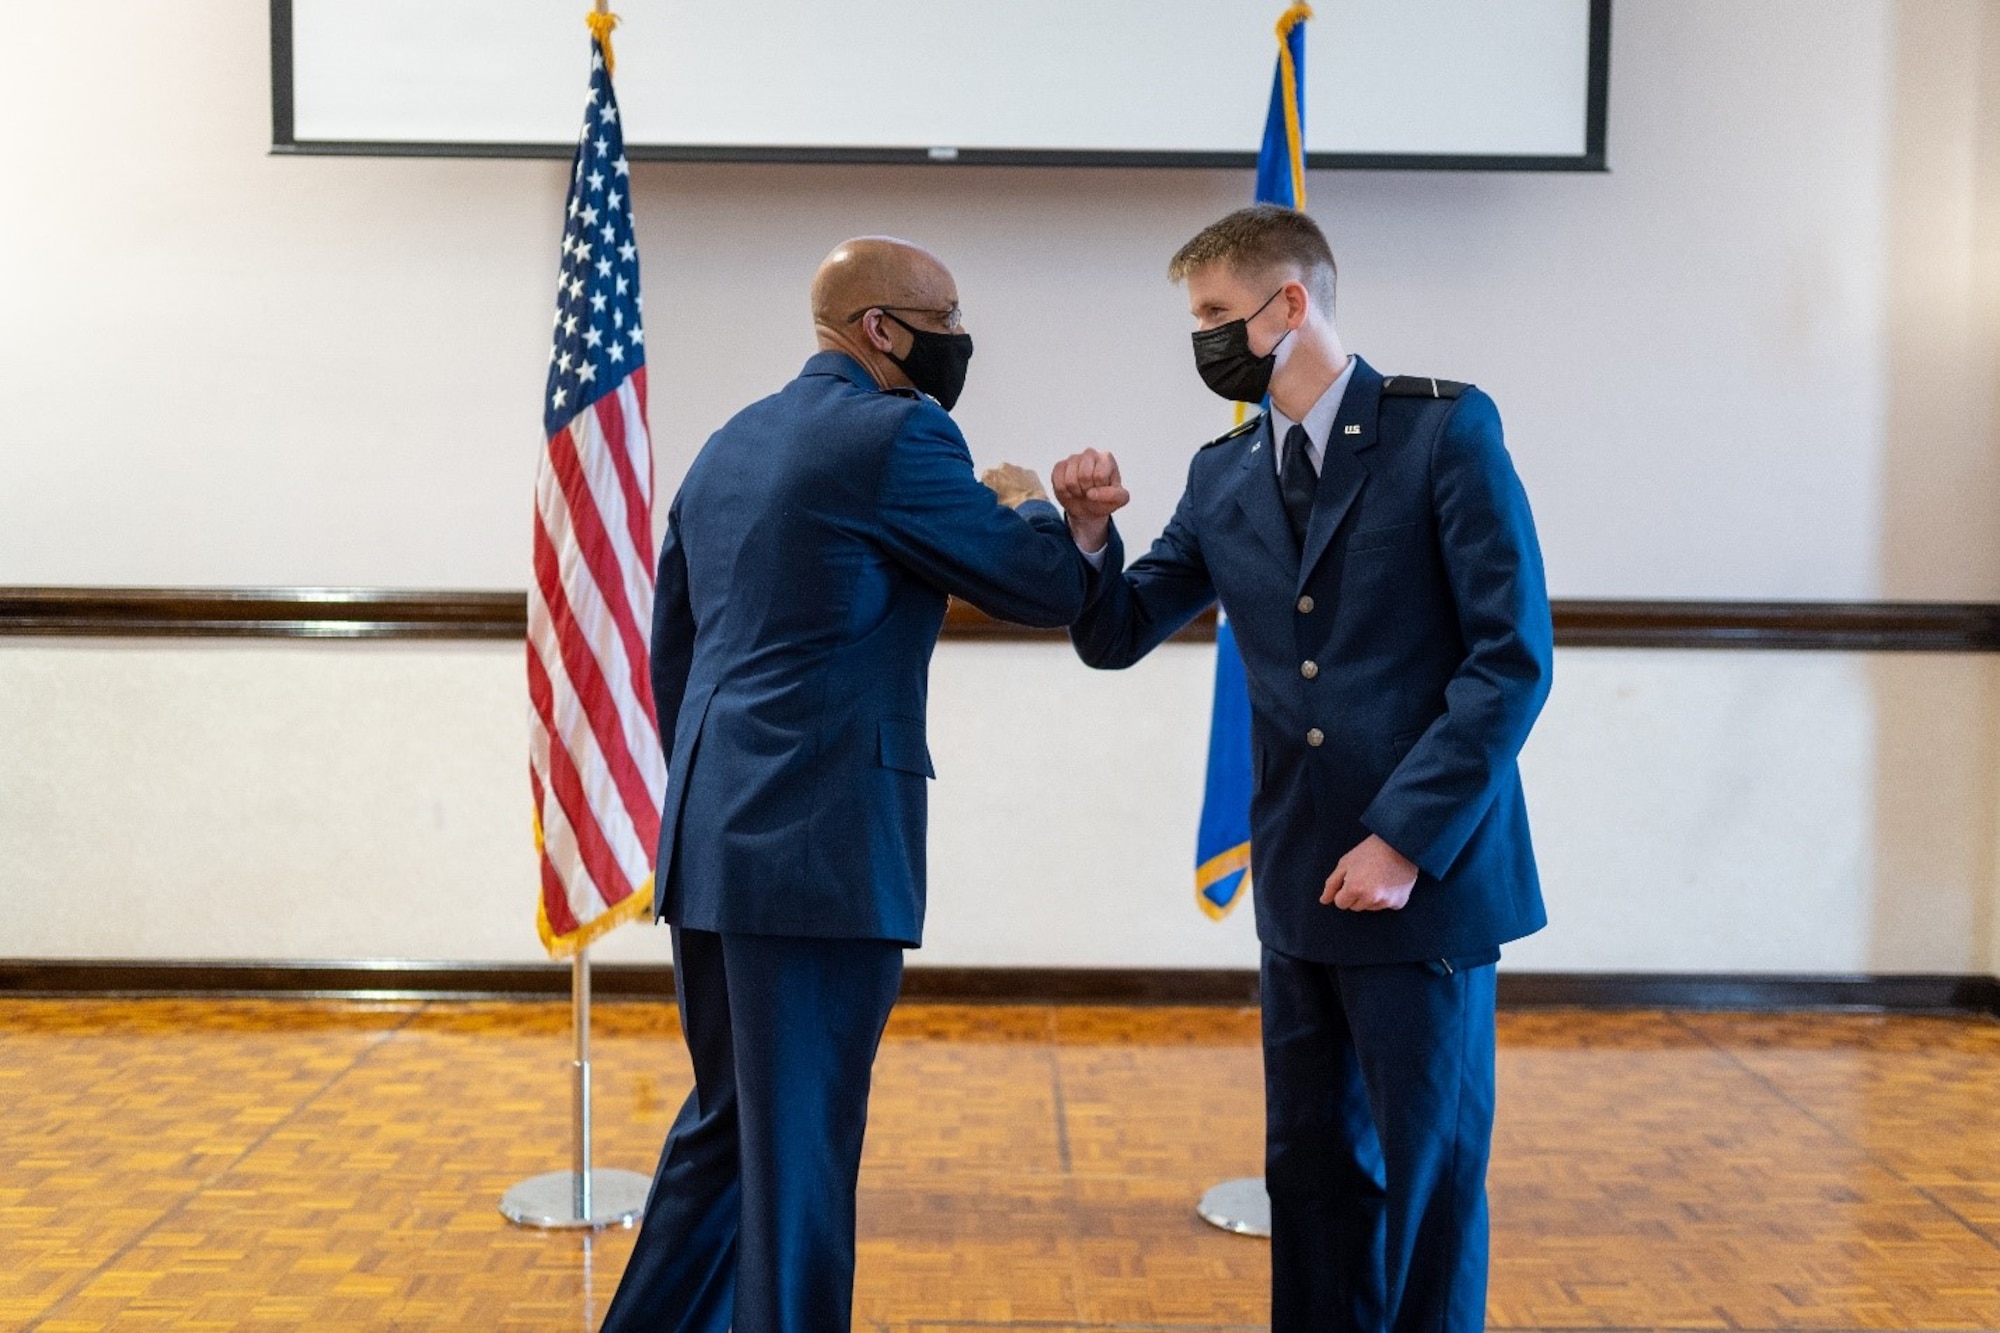 Air Force Chief of Staff Gen. Charles Q. Brown, Jr. presents a coin for excellence to U.S. Air Force
Reserve Officer Training Corps Cadet Hayden VanDeVoorde during a leadership laboratory at Saint
Louis University, St. Louis, Missouri April 28, 2021. Brown visited AFROTC Detachment 207 to speak
with cadets about preparing for challenges they will face as future officers. (U.S. Air Force photo by Cadet
Phillip Casey)